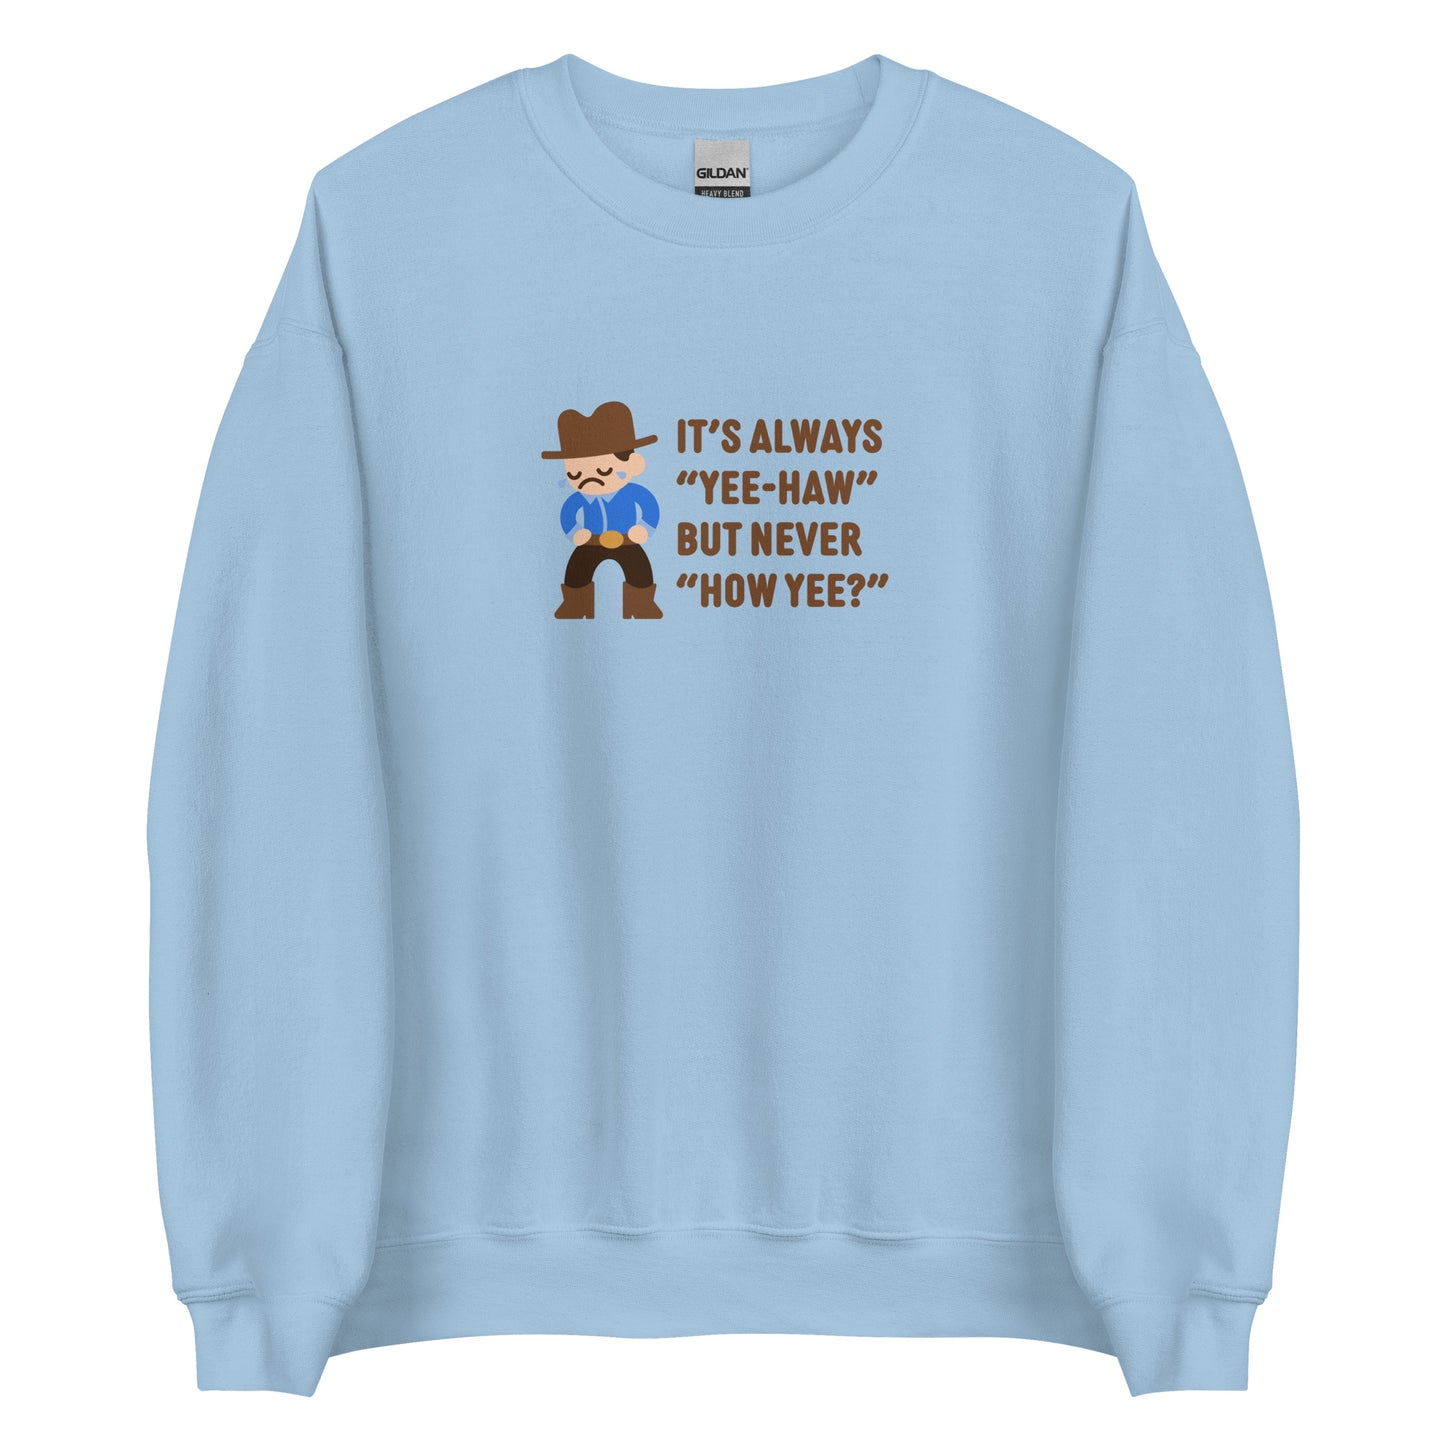 A light blue crewneck sweatshirt featuring an illustration of a crying cowboy wearing a blue shirt. Text alongside the cowboy reads "It's always "yee-haw" but never "How yee?""